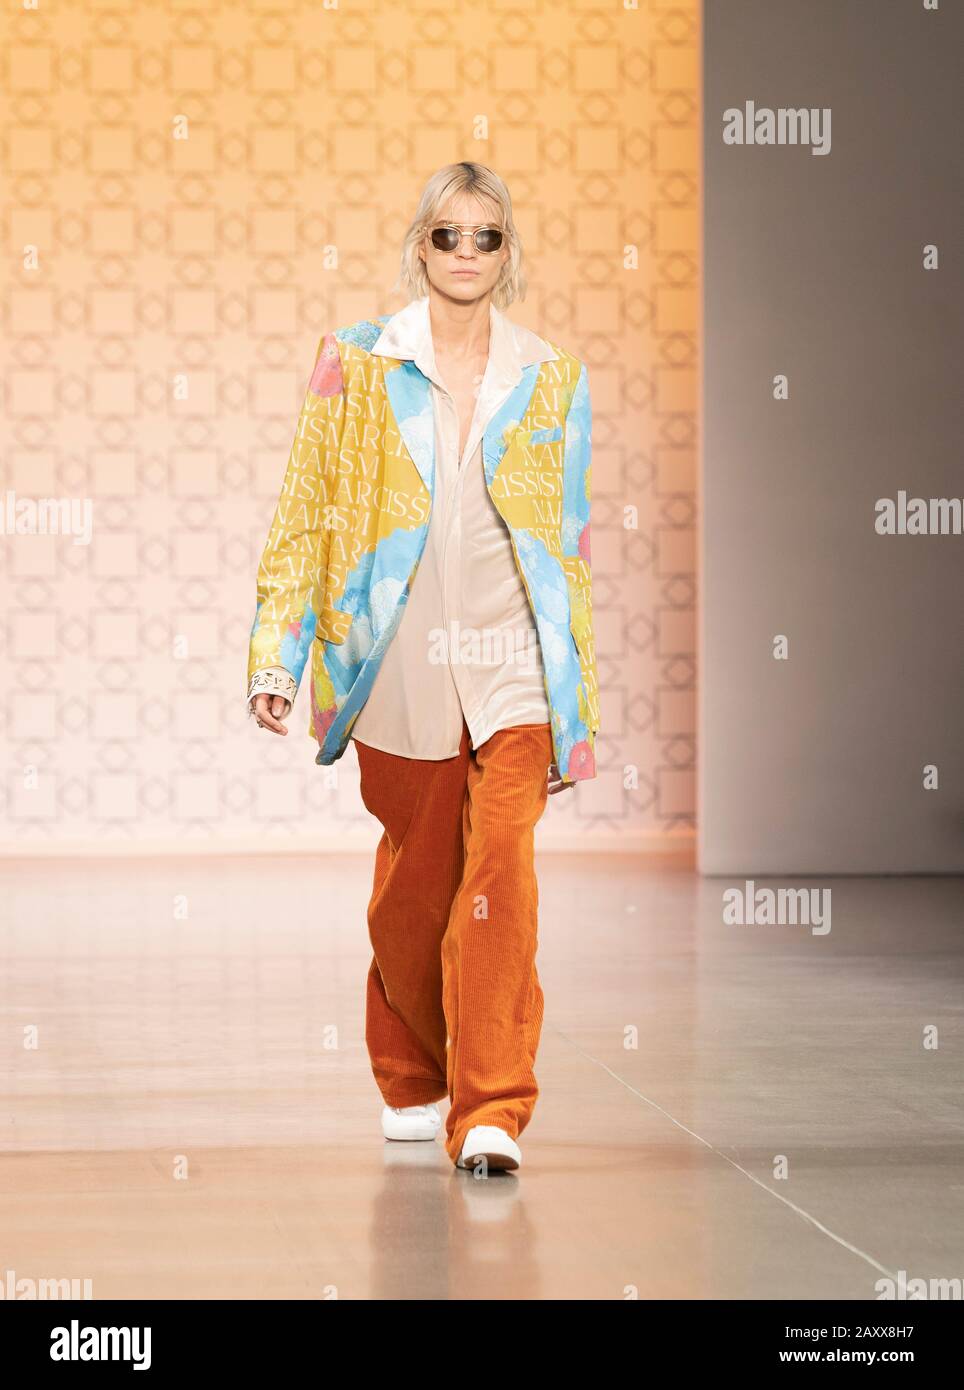 New York, NY - February 12, 2020: Model walks runway for Dirty Pineapple by Elsa Zai and Nellie Wang collection during Fashion Week at Spring Studios Stock Photo